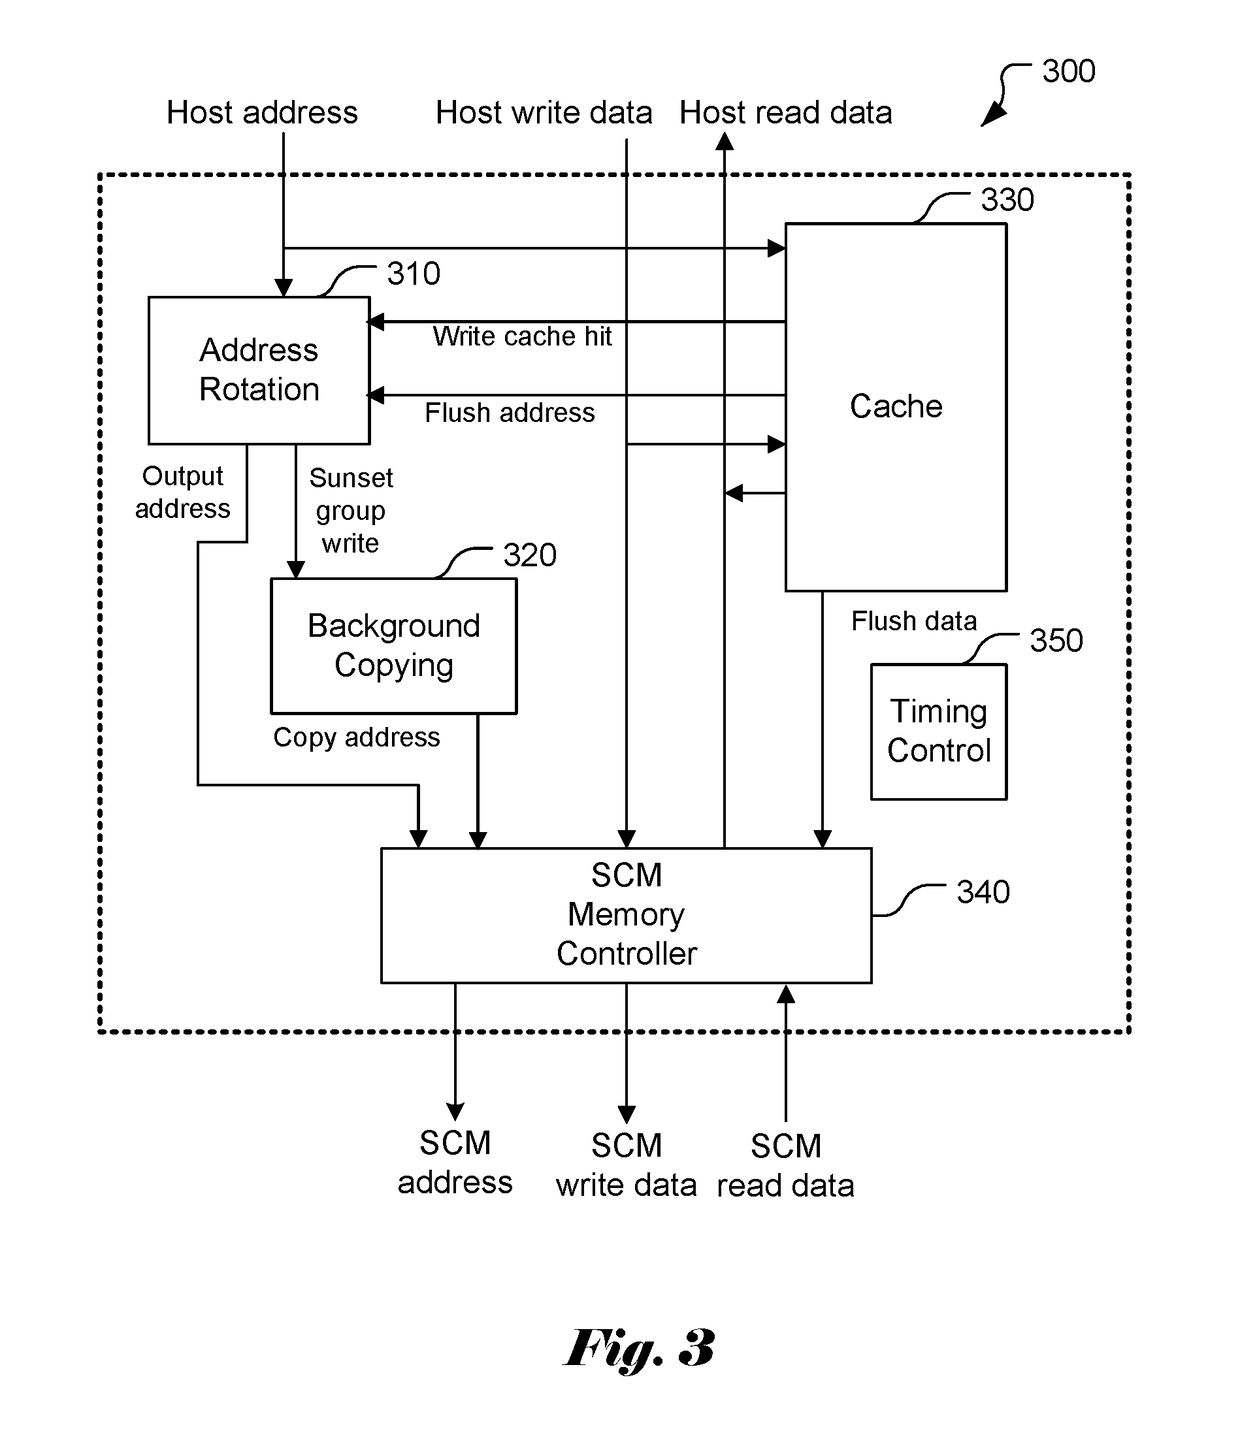 Apparatus and method of wear leveling for storage class memory using cache filtering